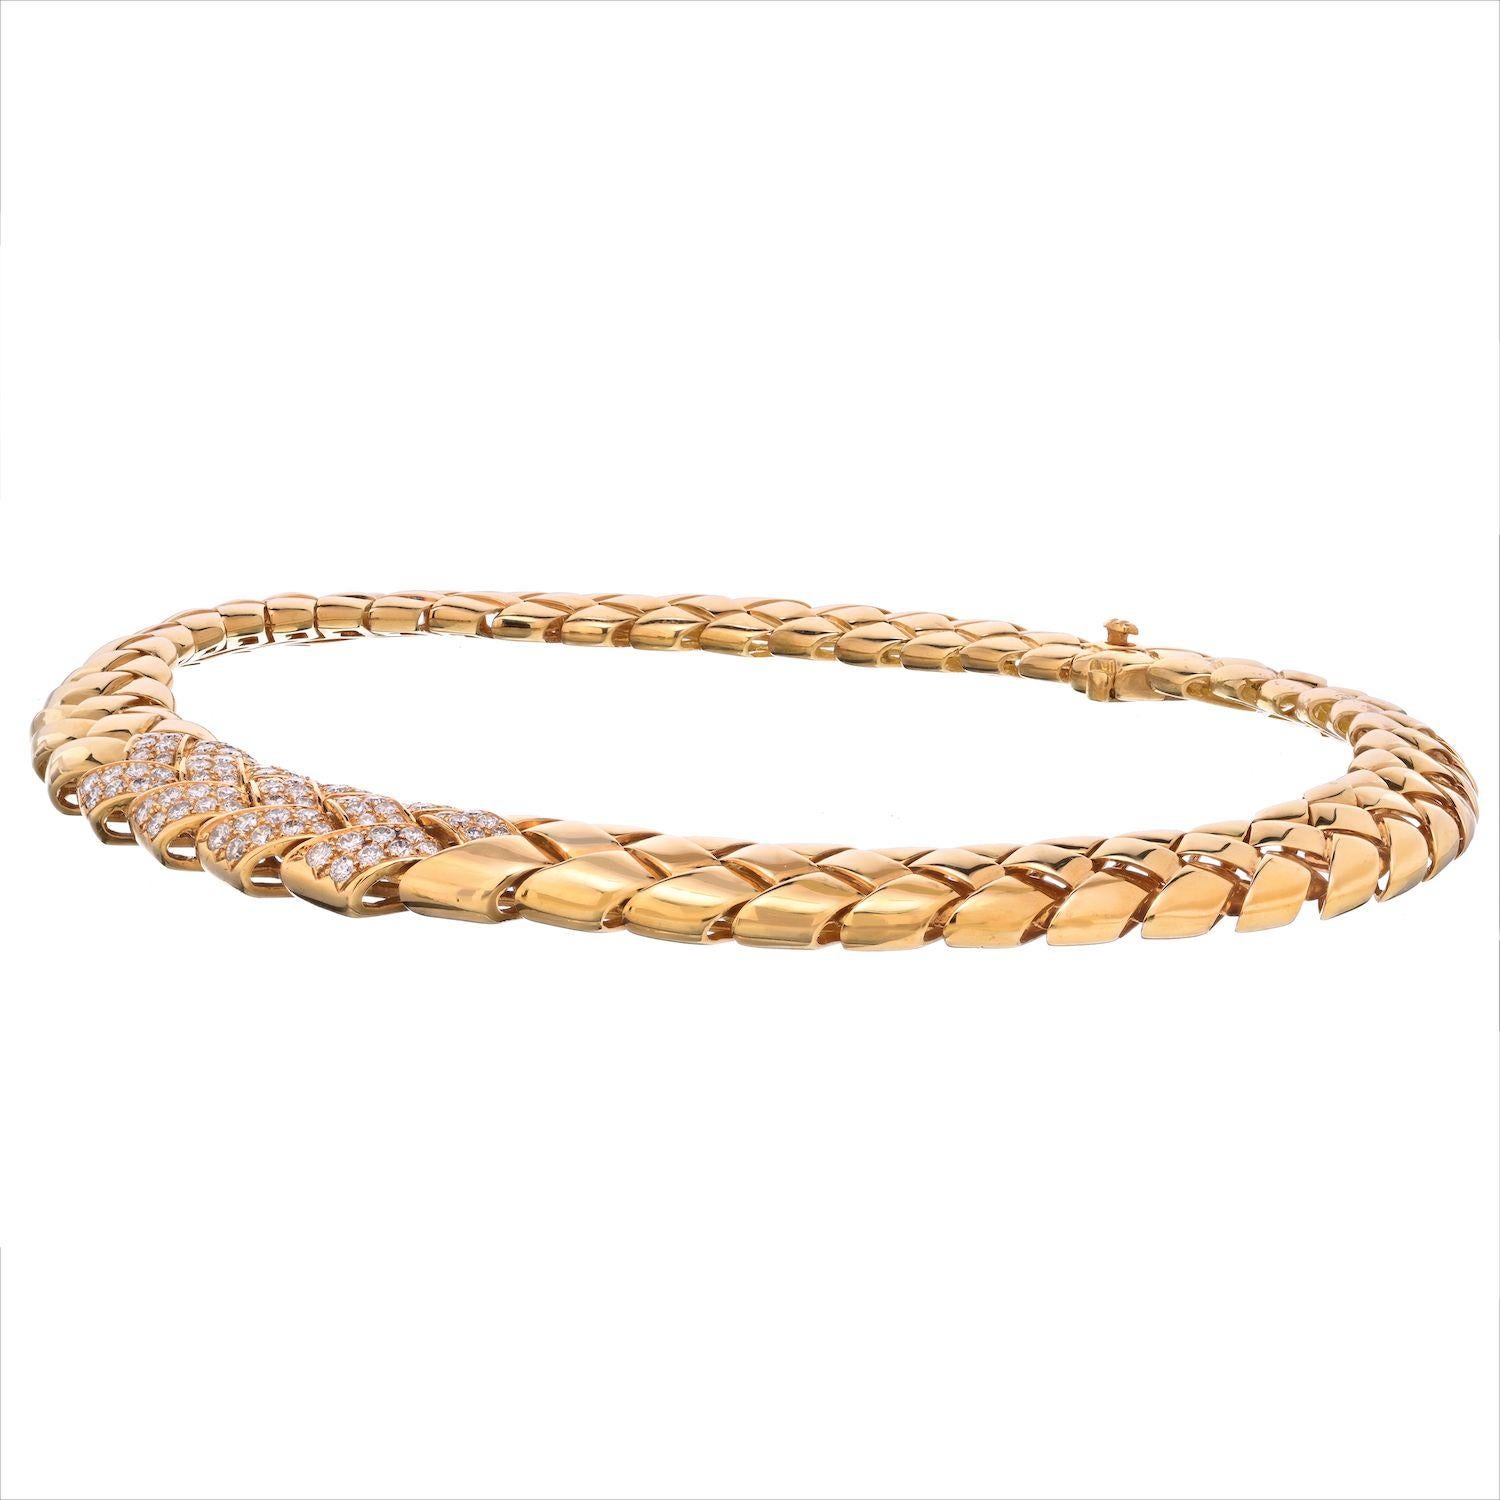 Van Cleef & Arpels woven yellow gold collar necklace circa 1980. 
Cllar style necklace that is in perfet condition, with diamond weight at about 6.00cts. Diamond quality E-F color, VVS to VS in clarity. 
Tongue in box clasp with safety latch.
French